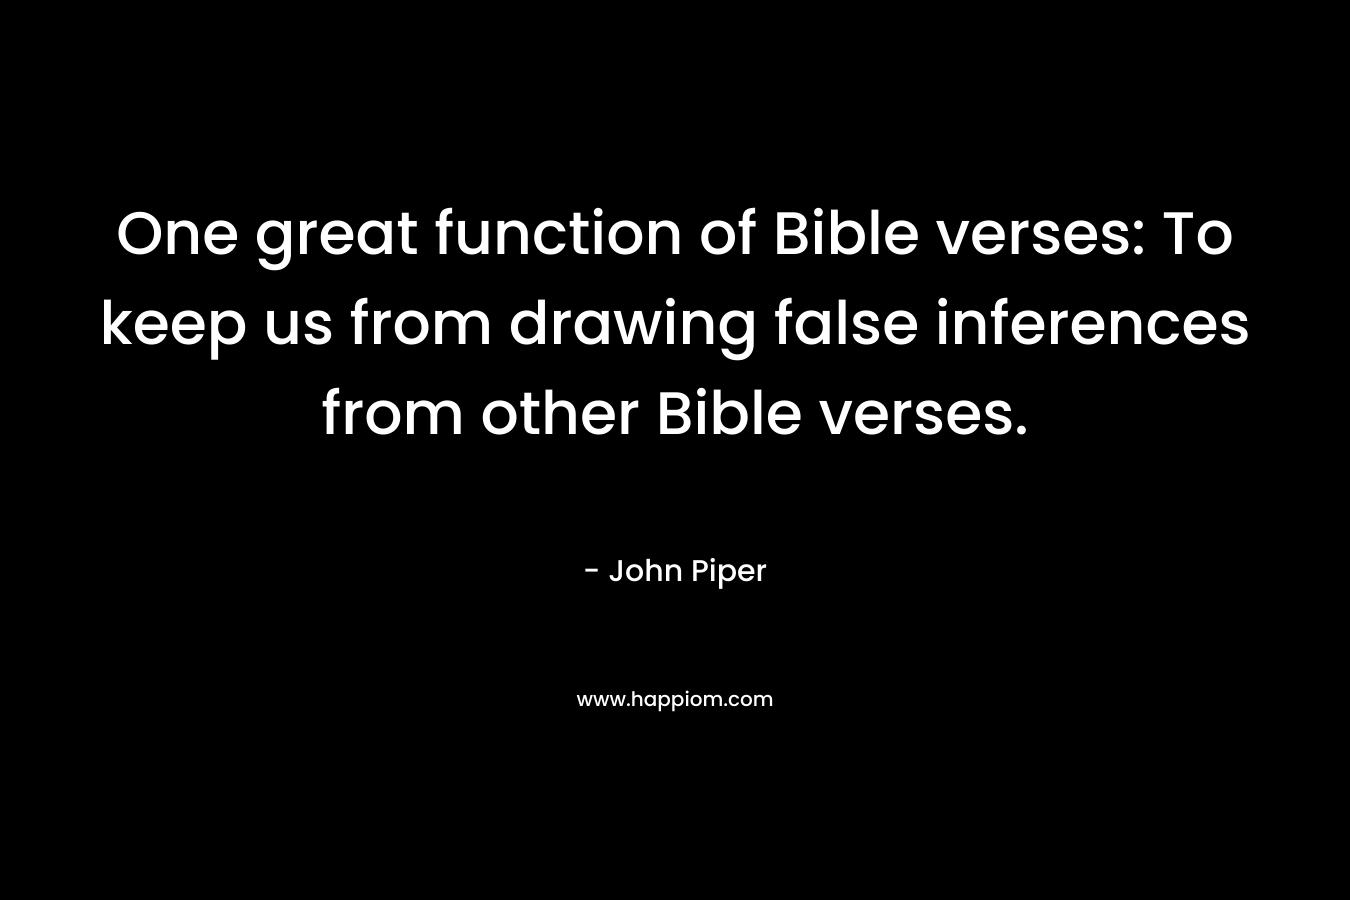 One great function of Bible verses: To keep us from drawing false inferences from other Bible verses. – John Piper